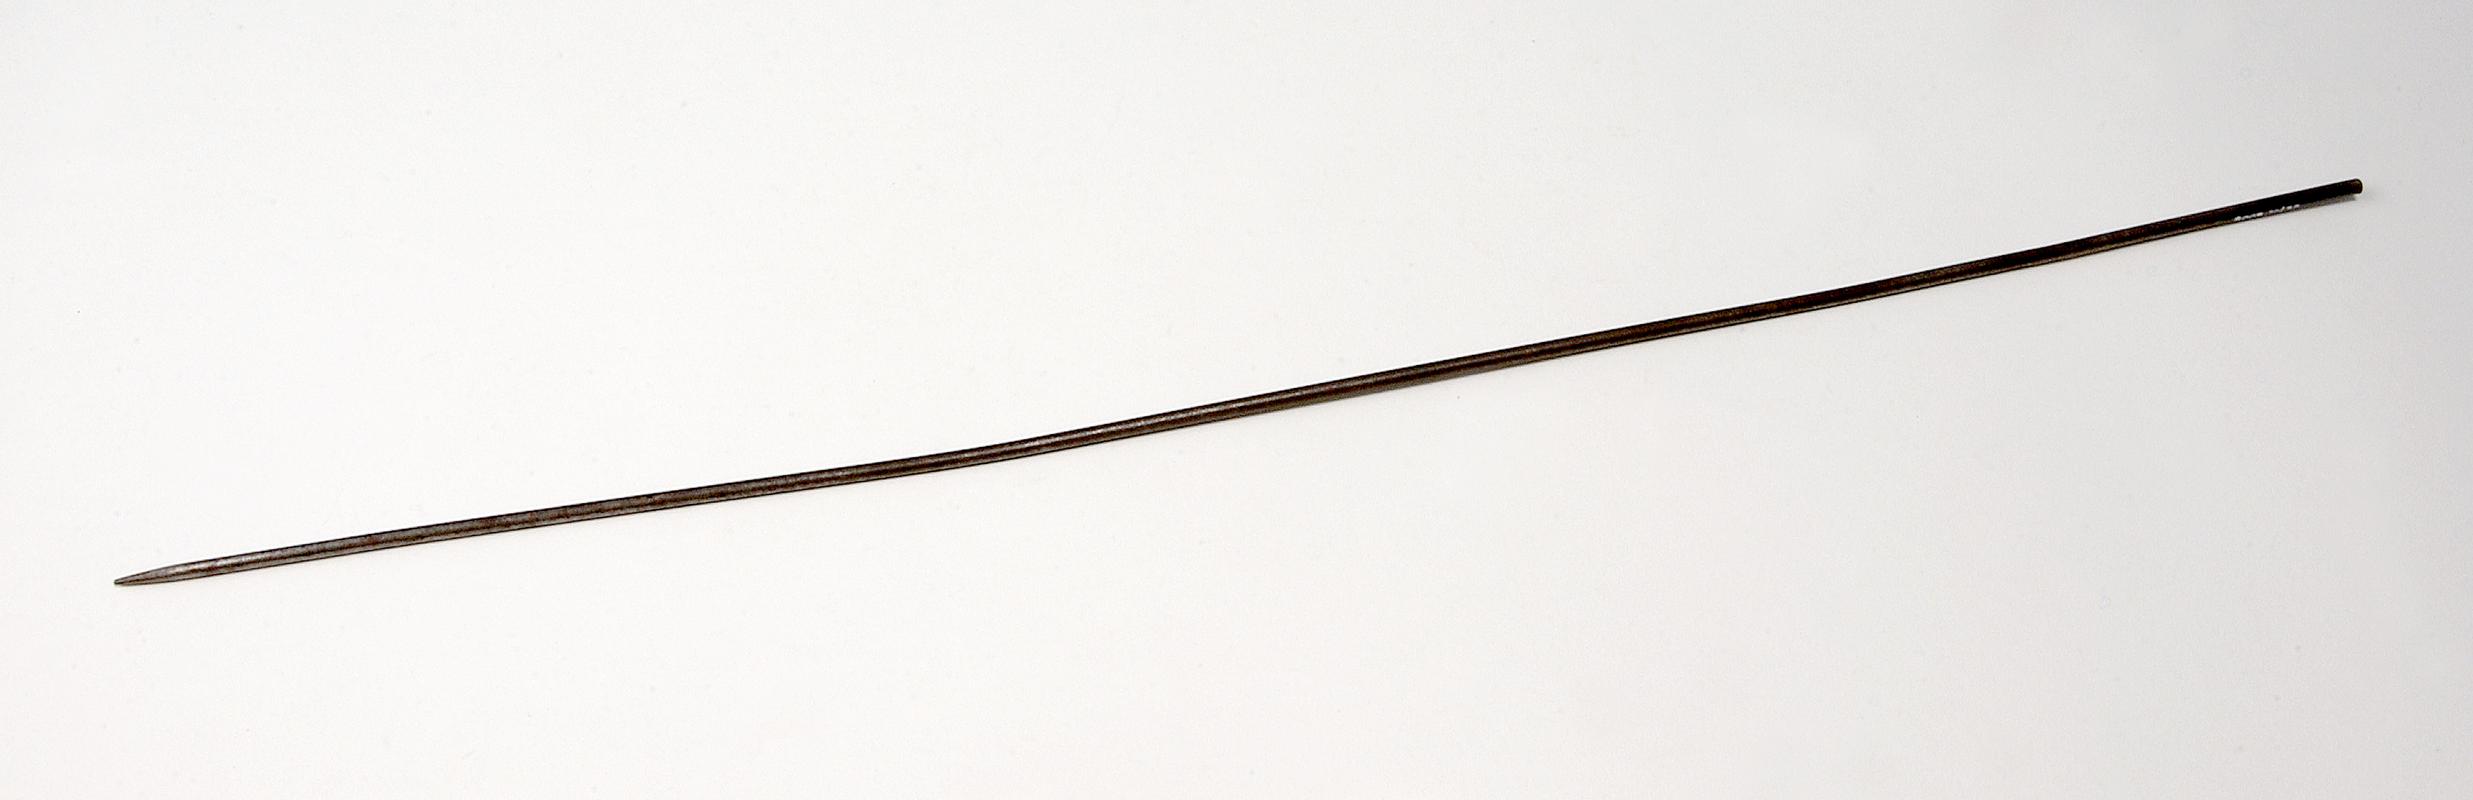 pointed steel wire (probably a core pin)